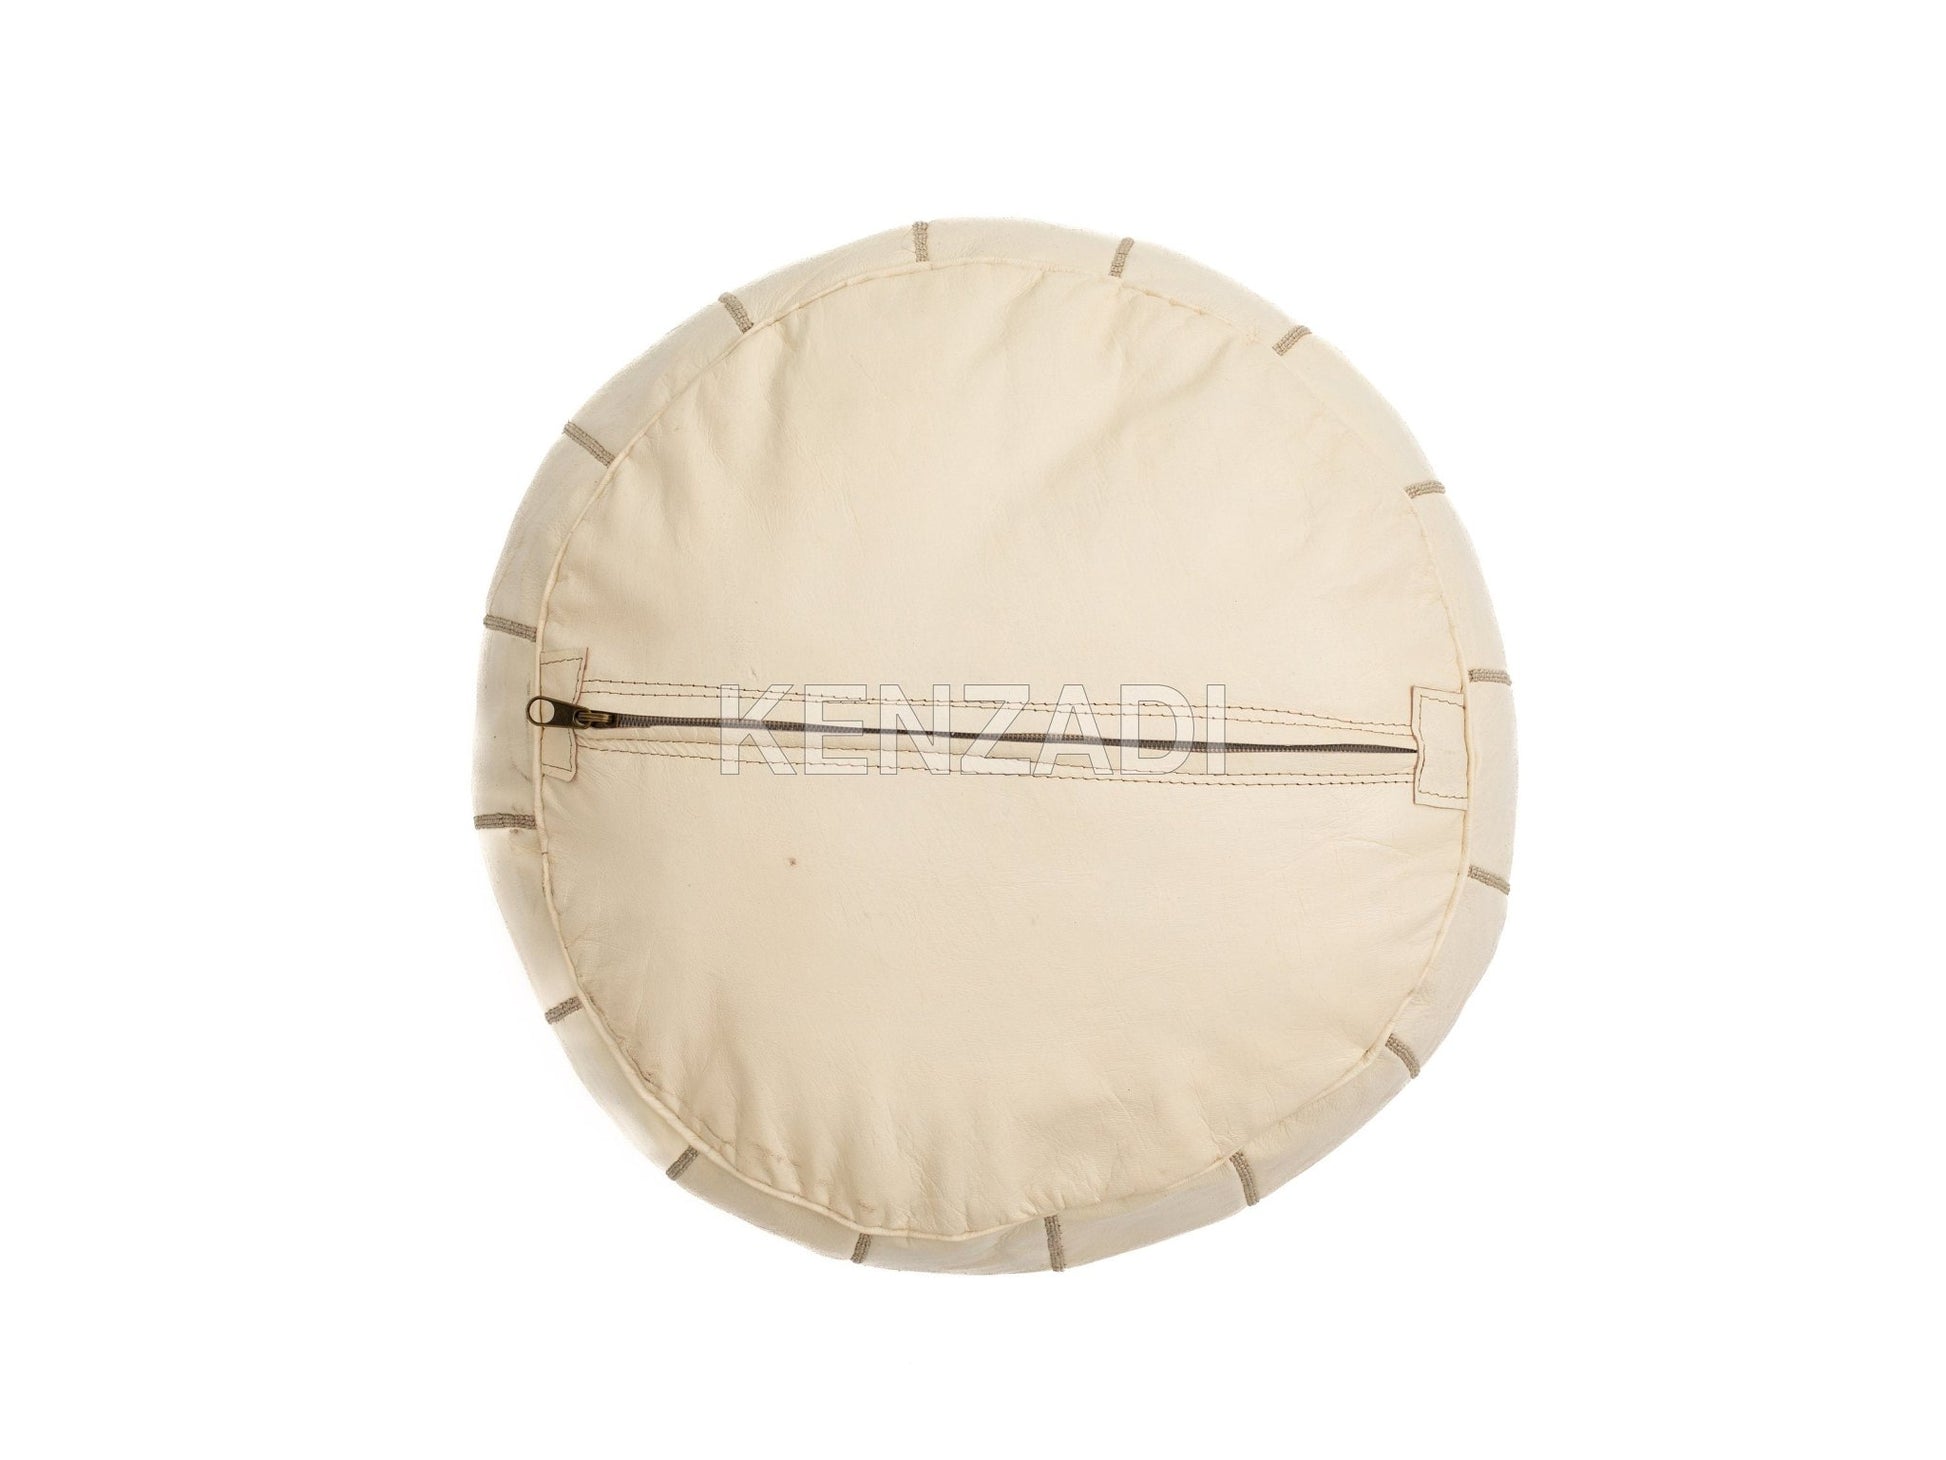 Authentic Moroccan leather pouf with beige embroidery, perfect for adding a bohemian touch to your home décor